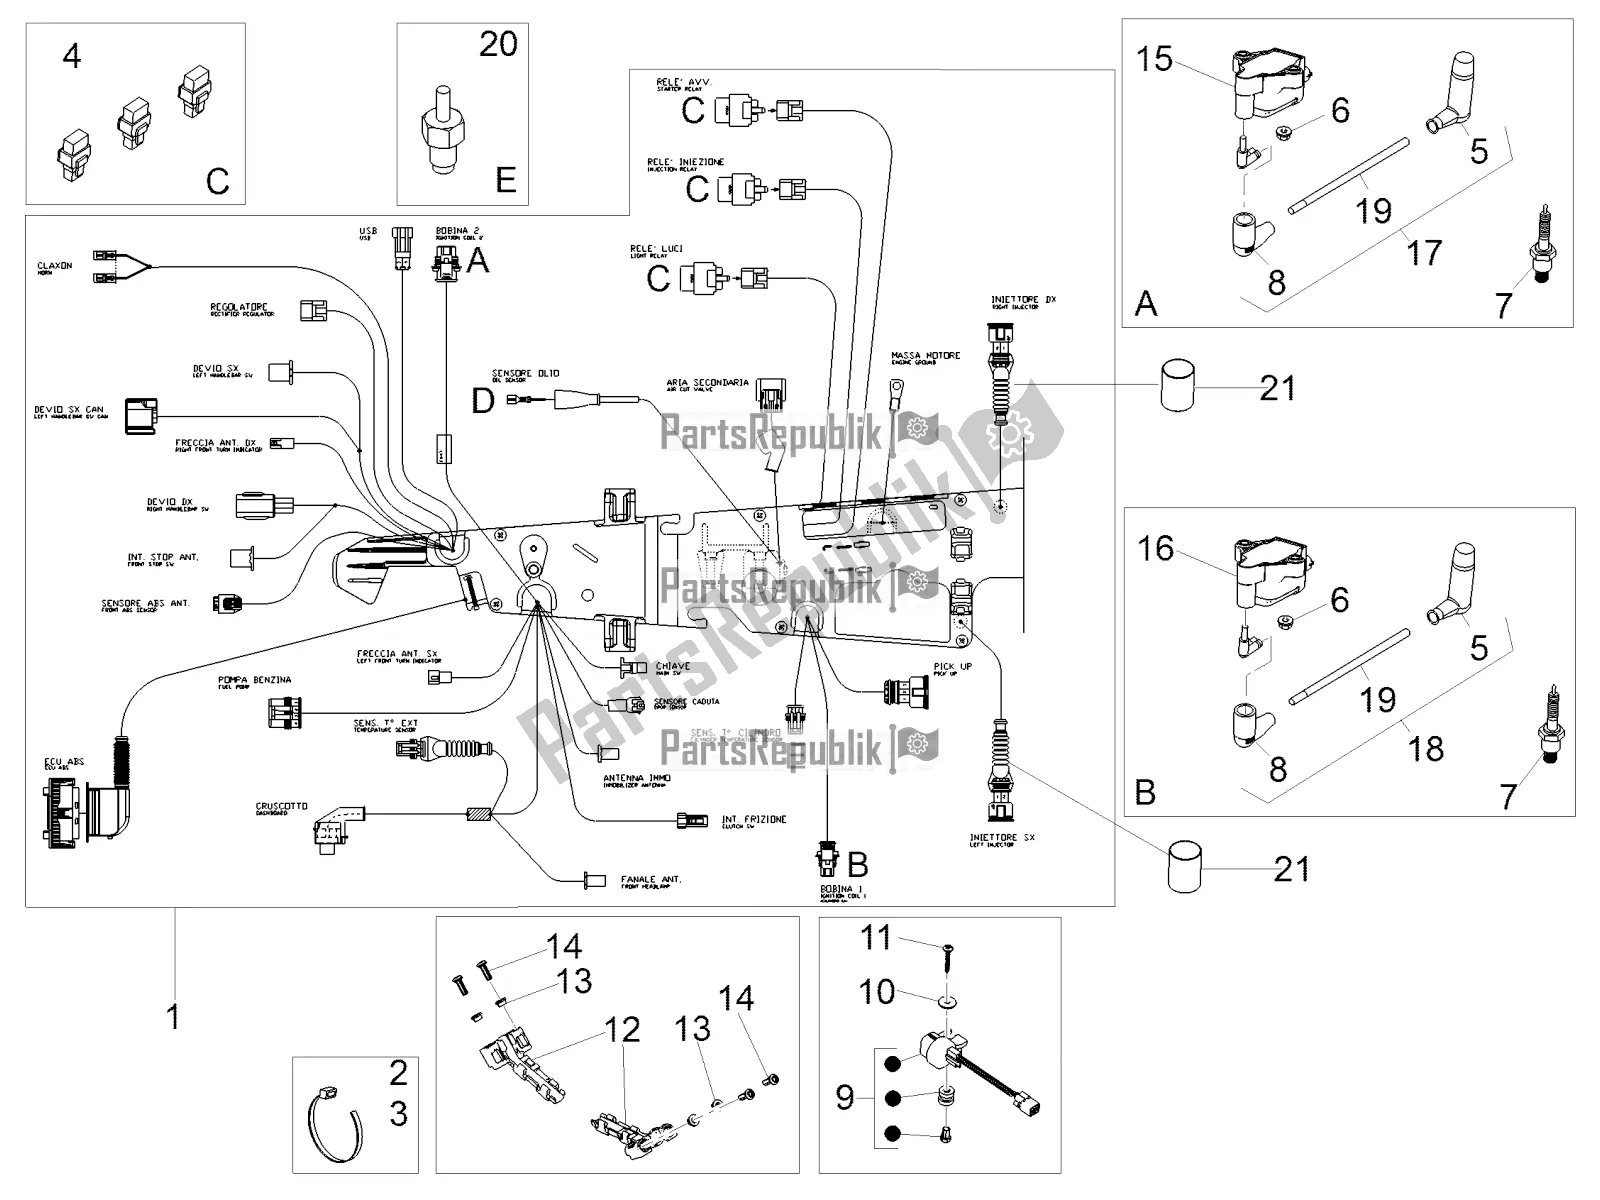 All parts for the Central Electrical System of the Moto-Guzzi V7 III Rough 750 ABS 2019